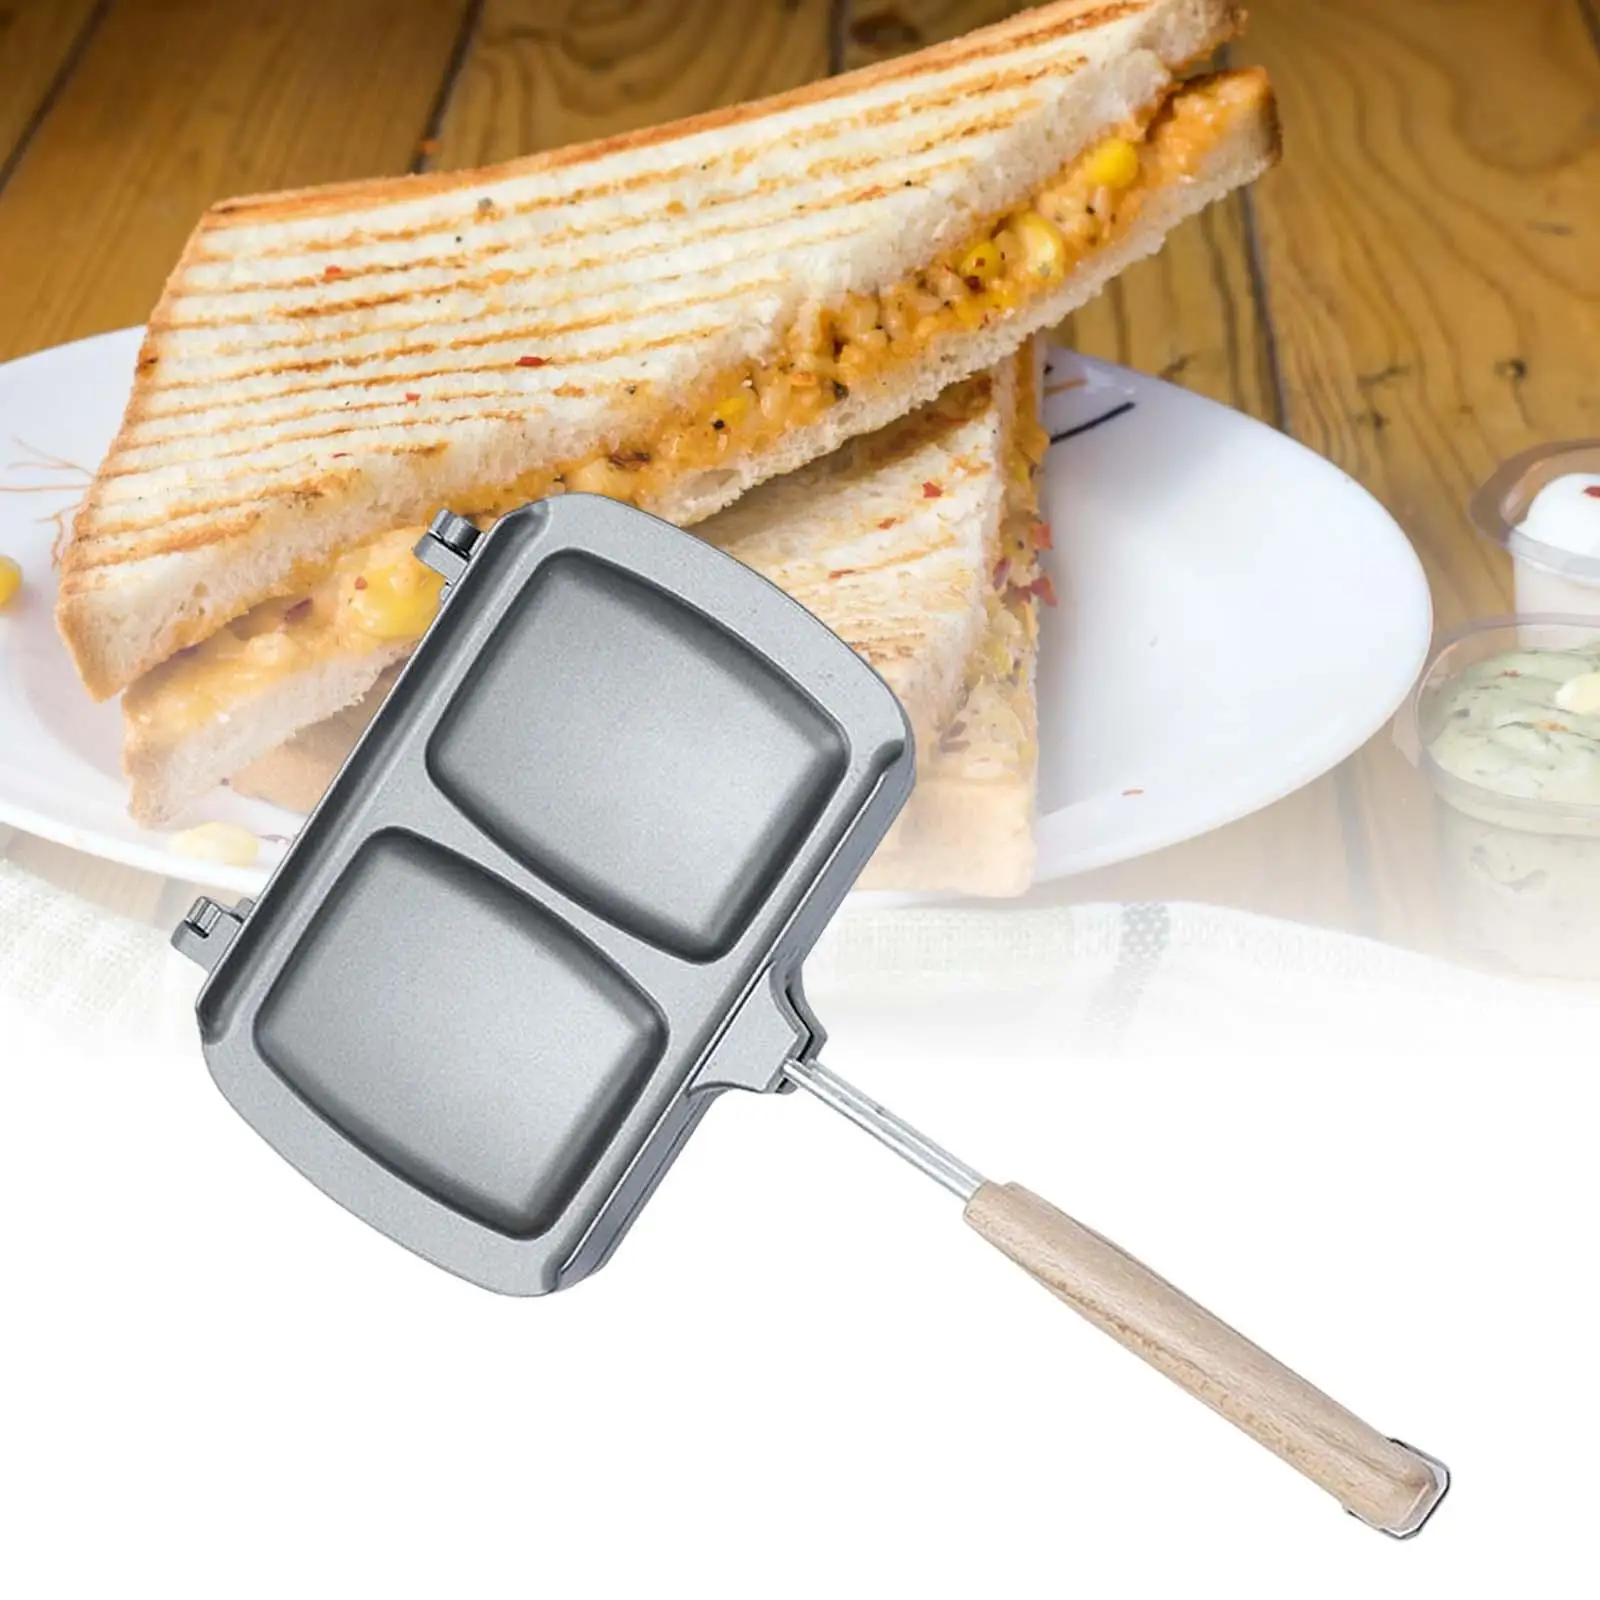 Bread Toast Maker Non Stick Grill Pan Double Sided Heating Frying Egg Ham Sandwiches Maker for Induction Cooker Stove Top five sided heater barbecue type fire grill small sun electric oven household four side electric heating stove